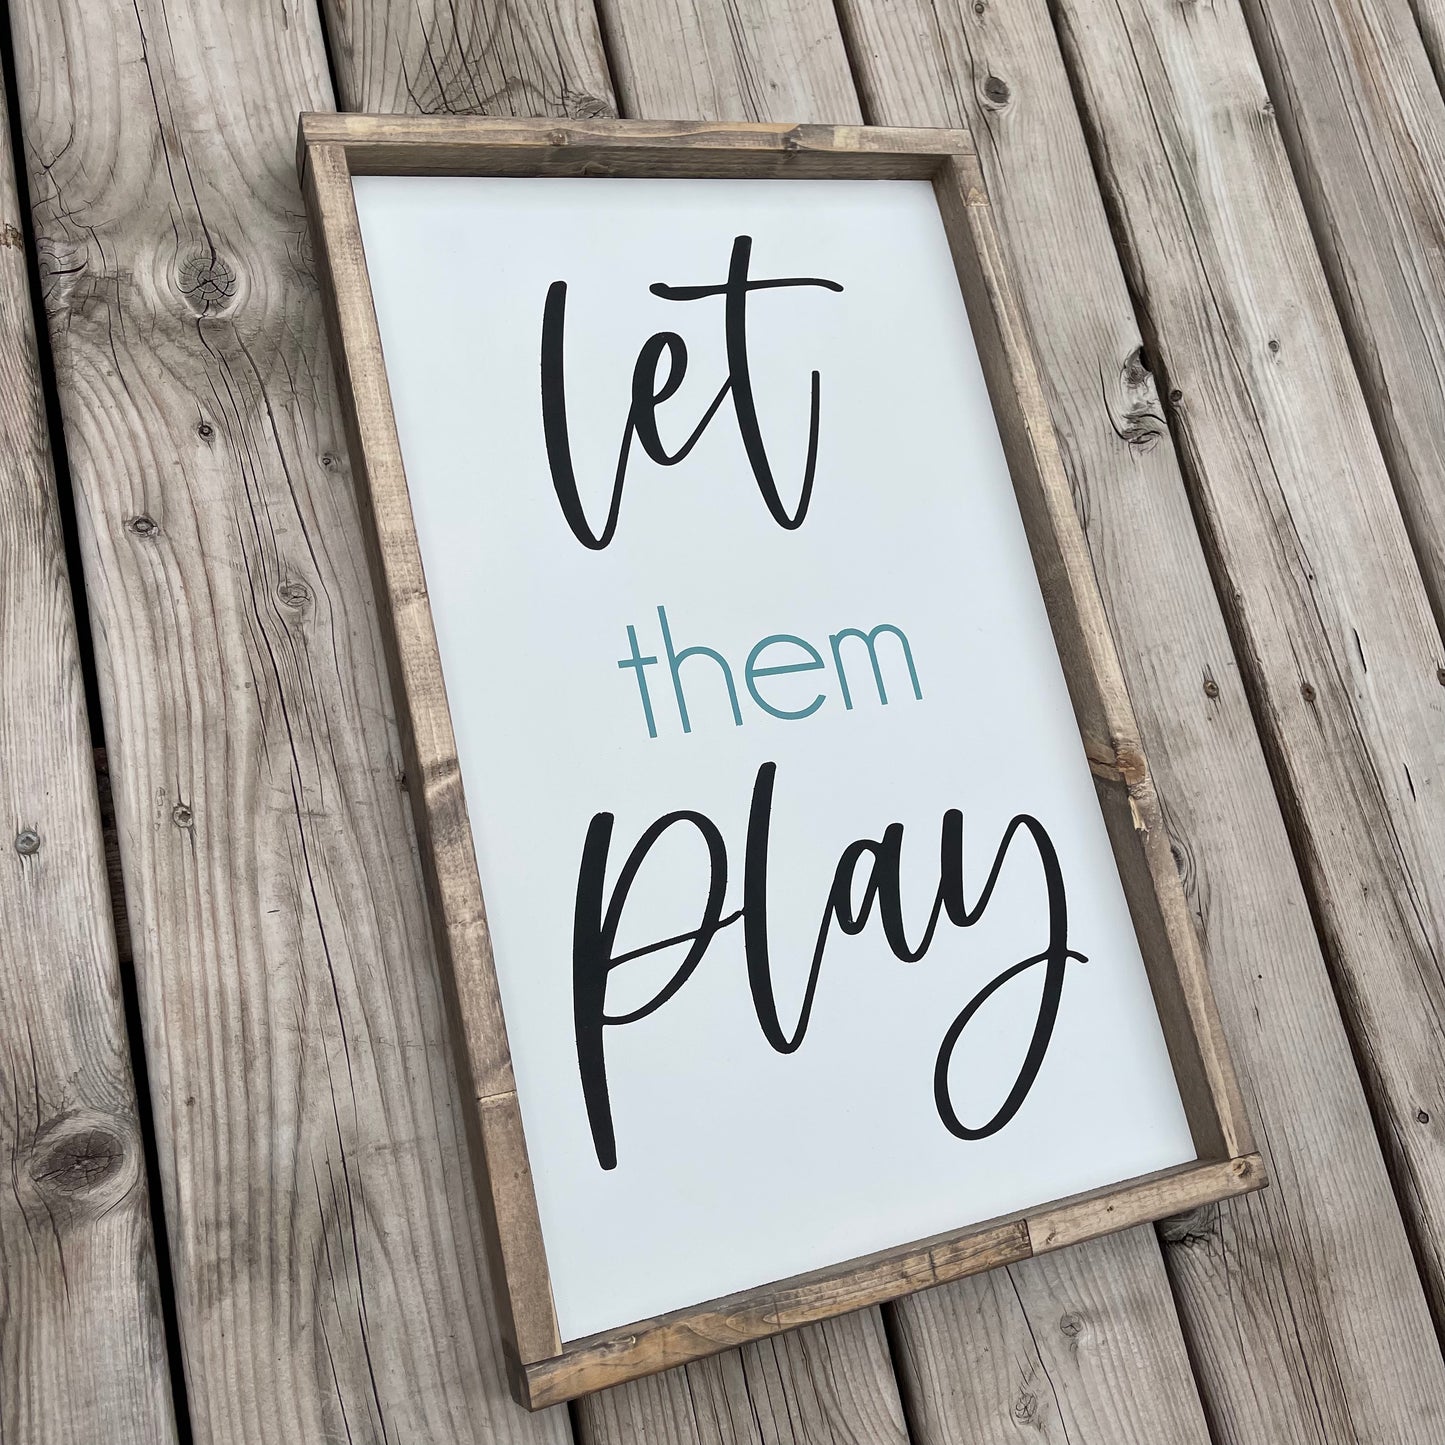 “Let them play” Painted sign